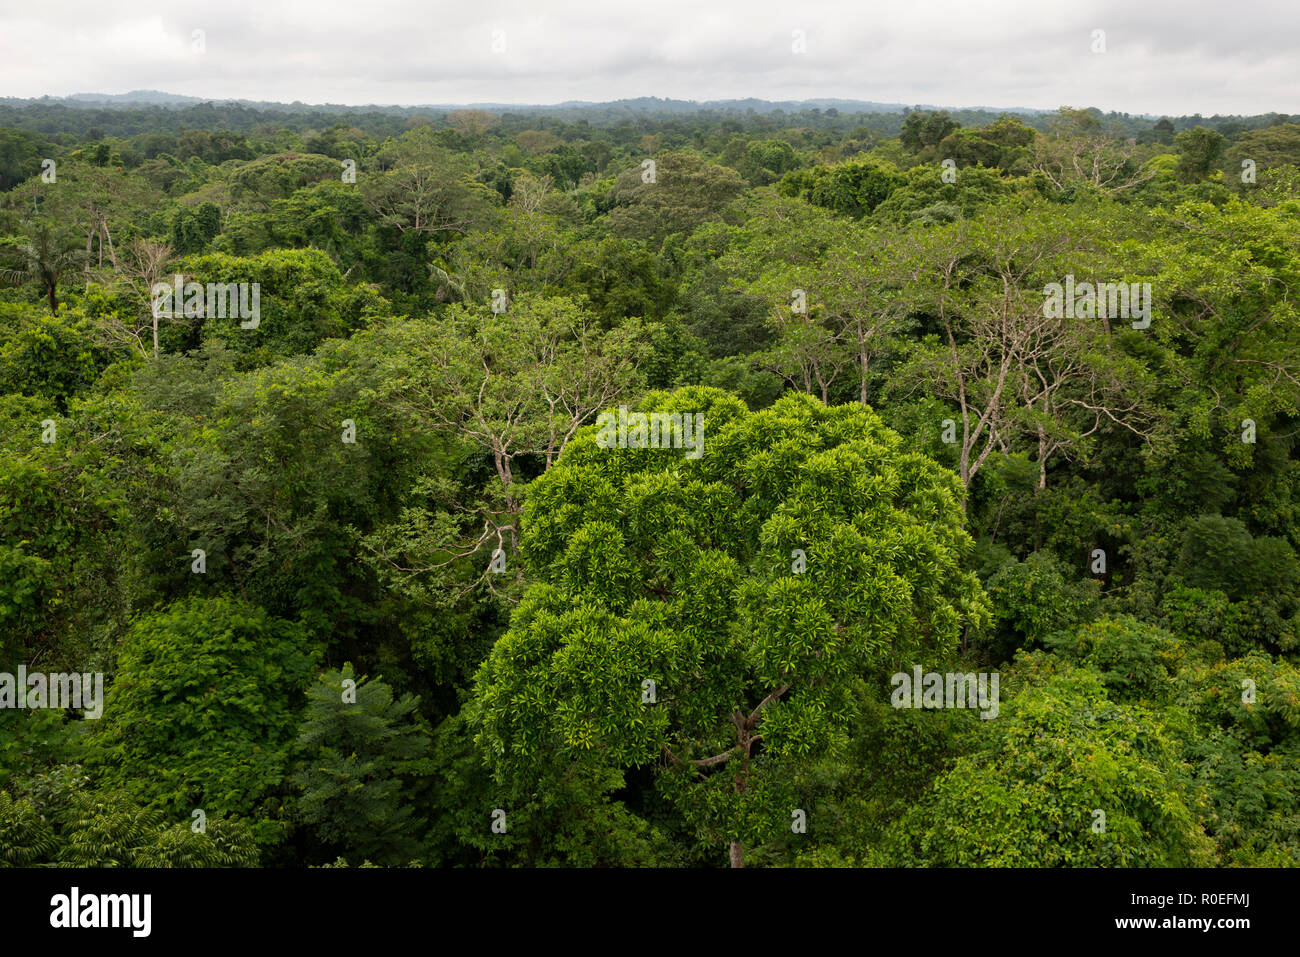 The Amazon Rainforest from above, at Cristalino Lodge, South Amazon, Brazil Stock Photo